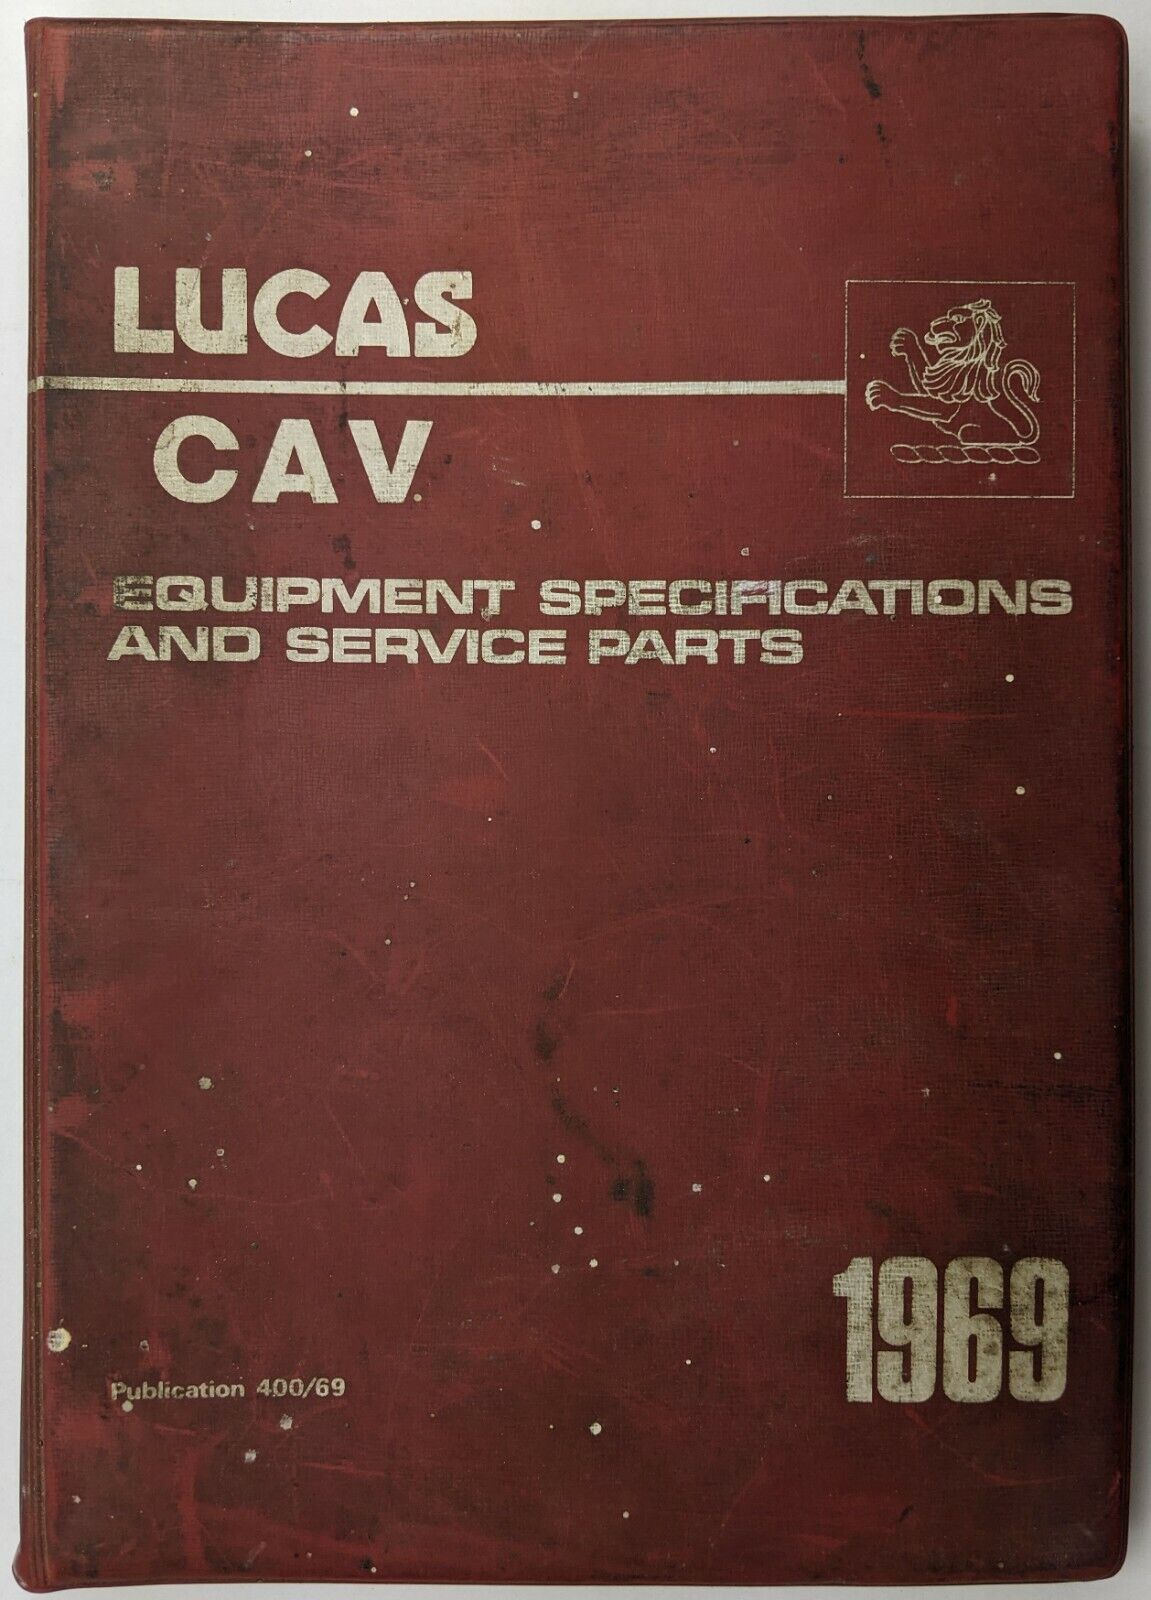 Lucas Seattle Mall CAV Equivalent Specifications Service 400 Parts 6 Max 44% OFF Folder